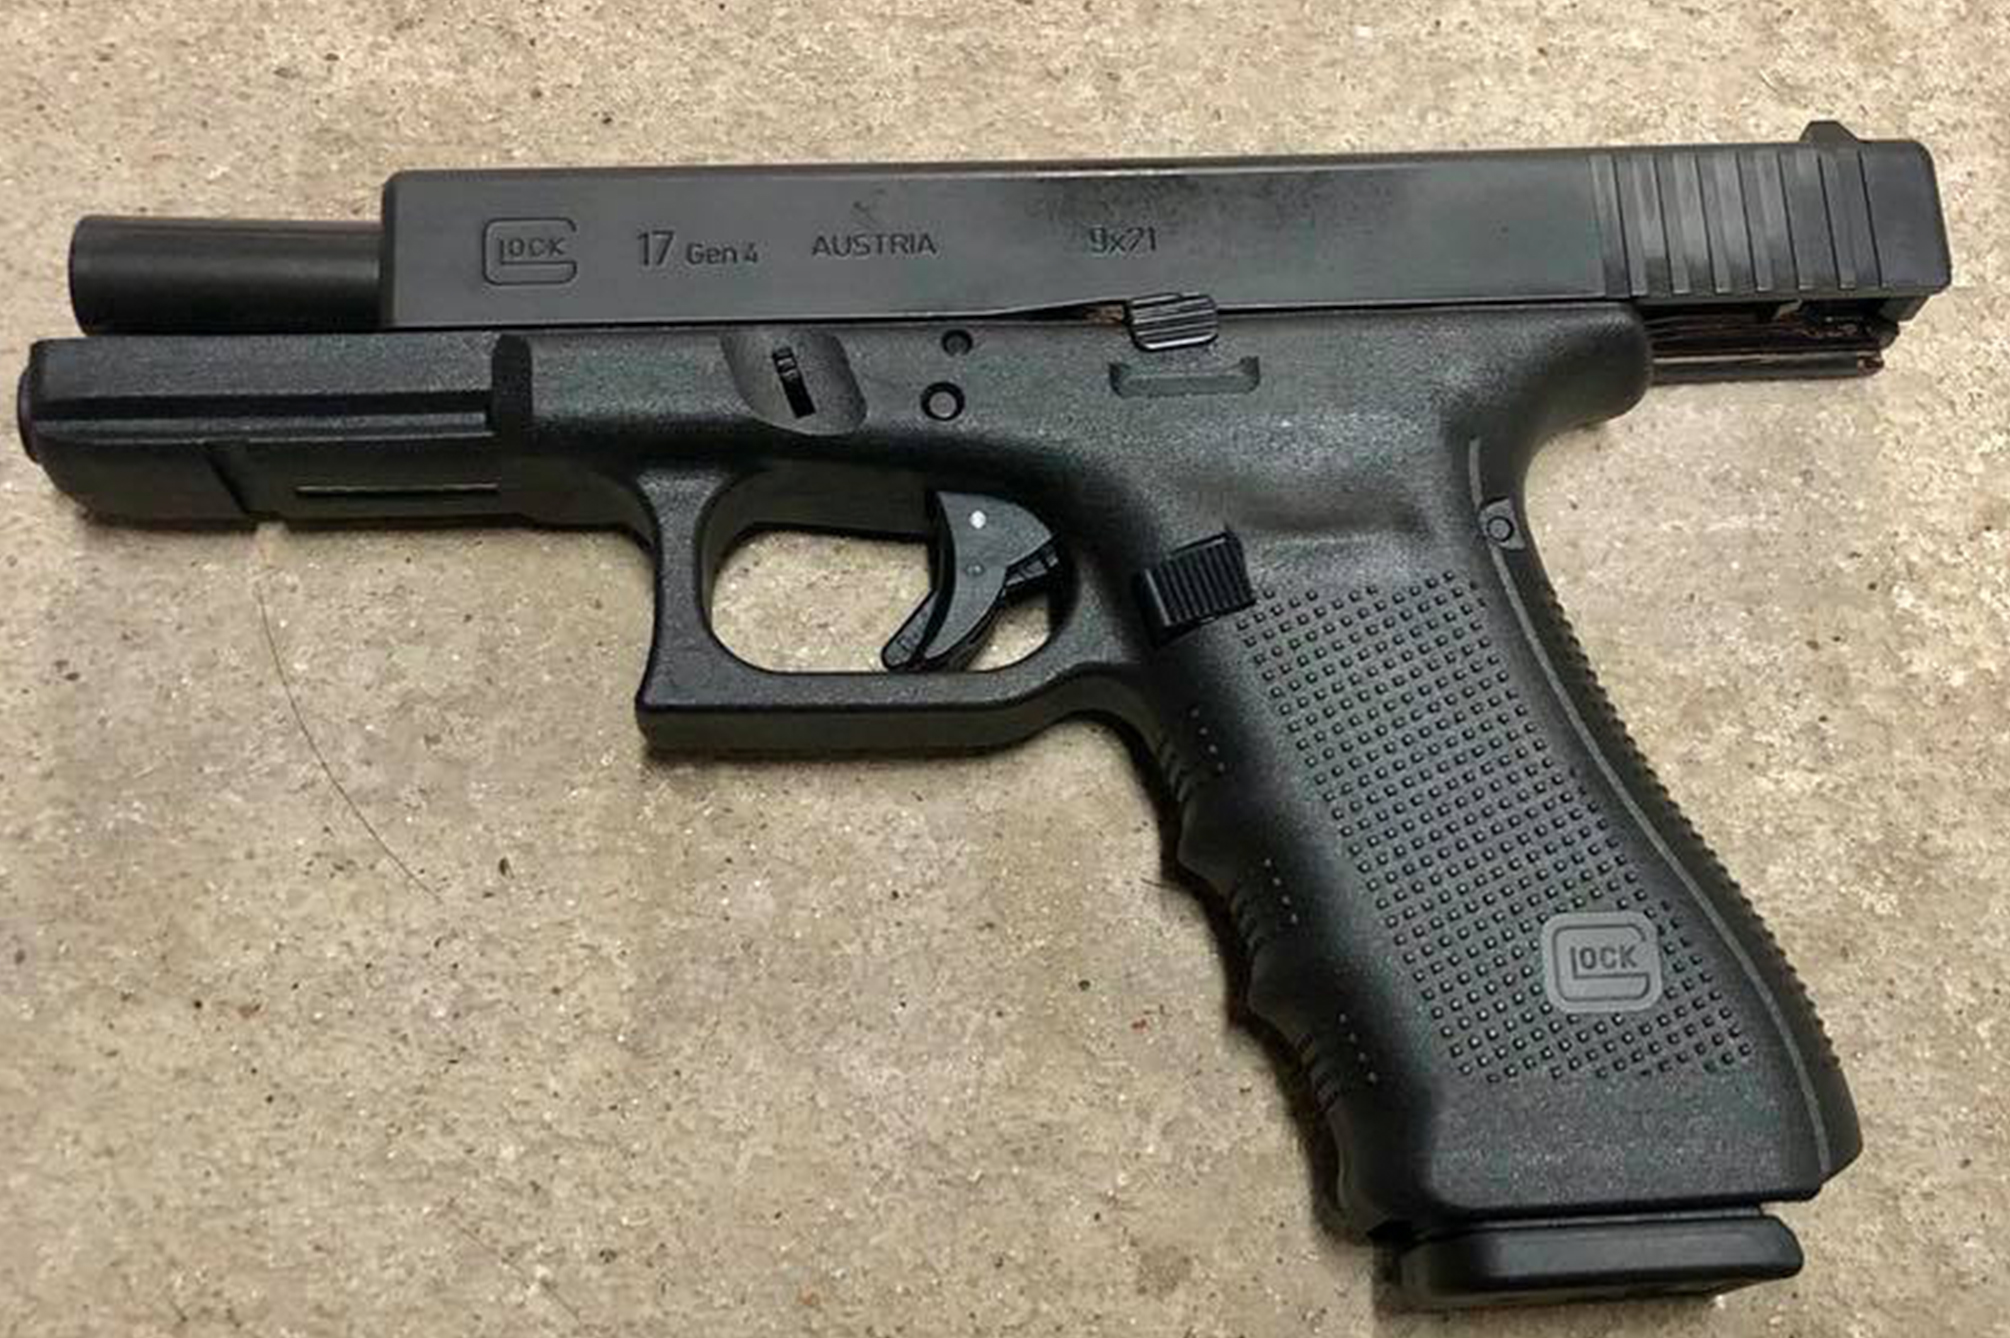 Imported 9x21 Glock 17 For Sale On Gunbroker | RECOIL